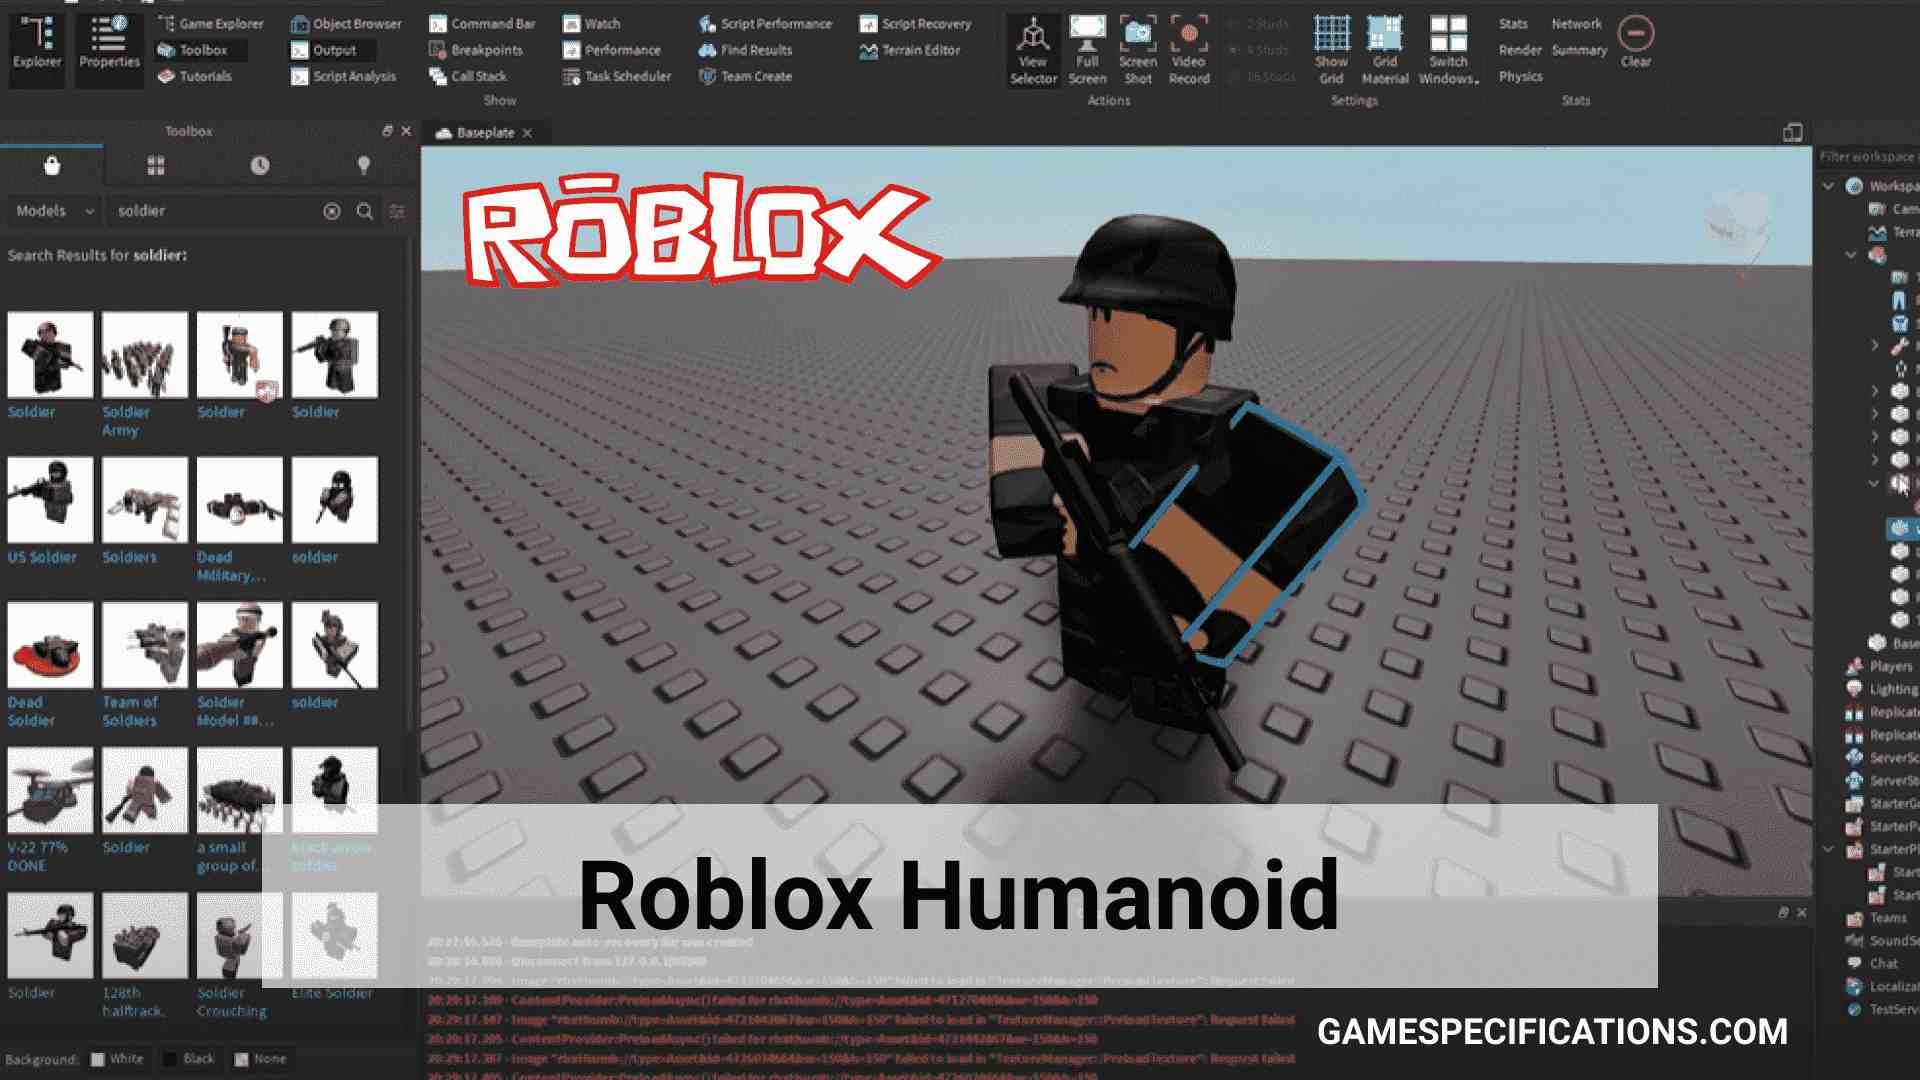 Roblox Humanoid Complete Guide On Humanoid Coding 2021 Game Specifications - confetti ghost roblox id